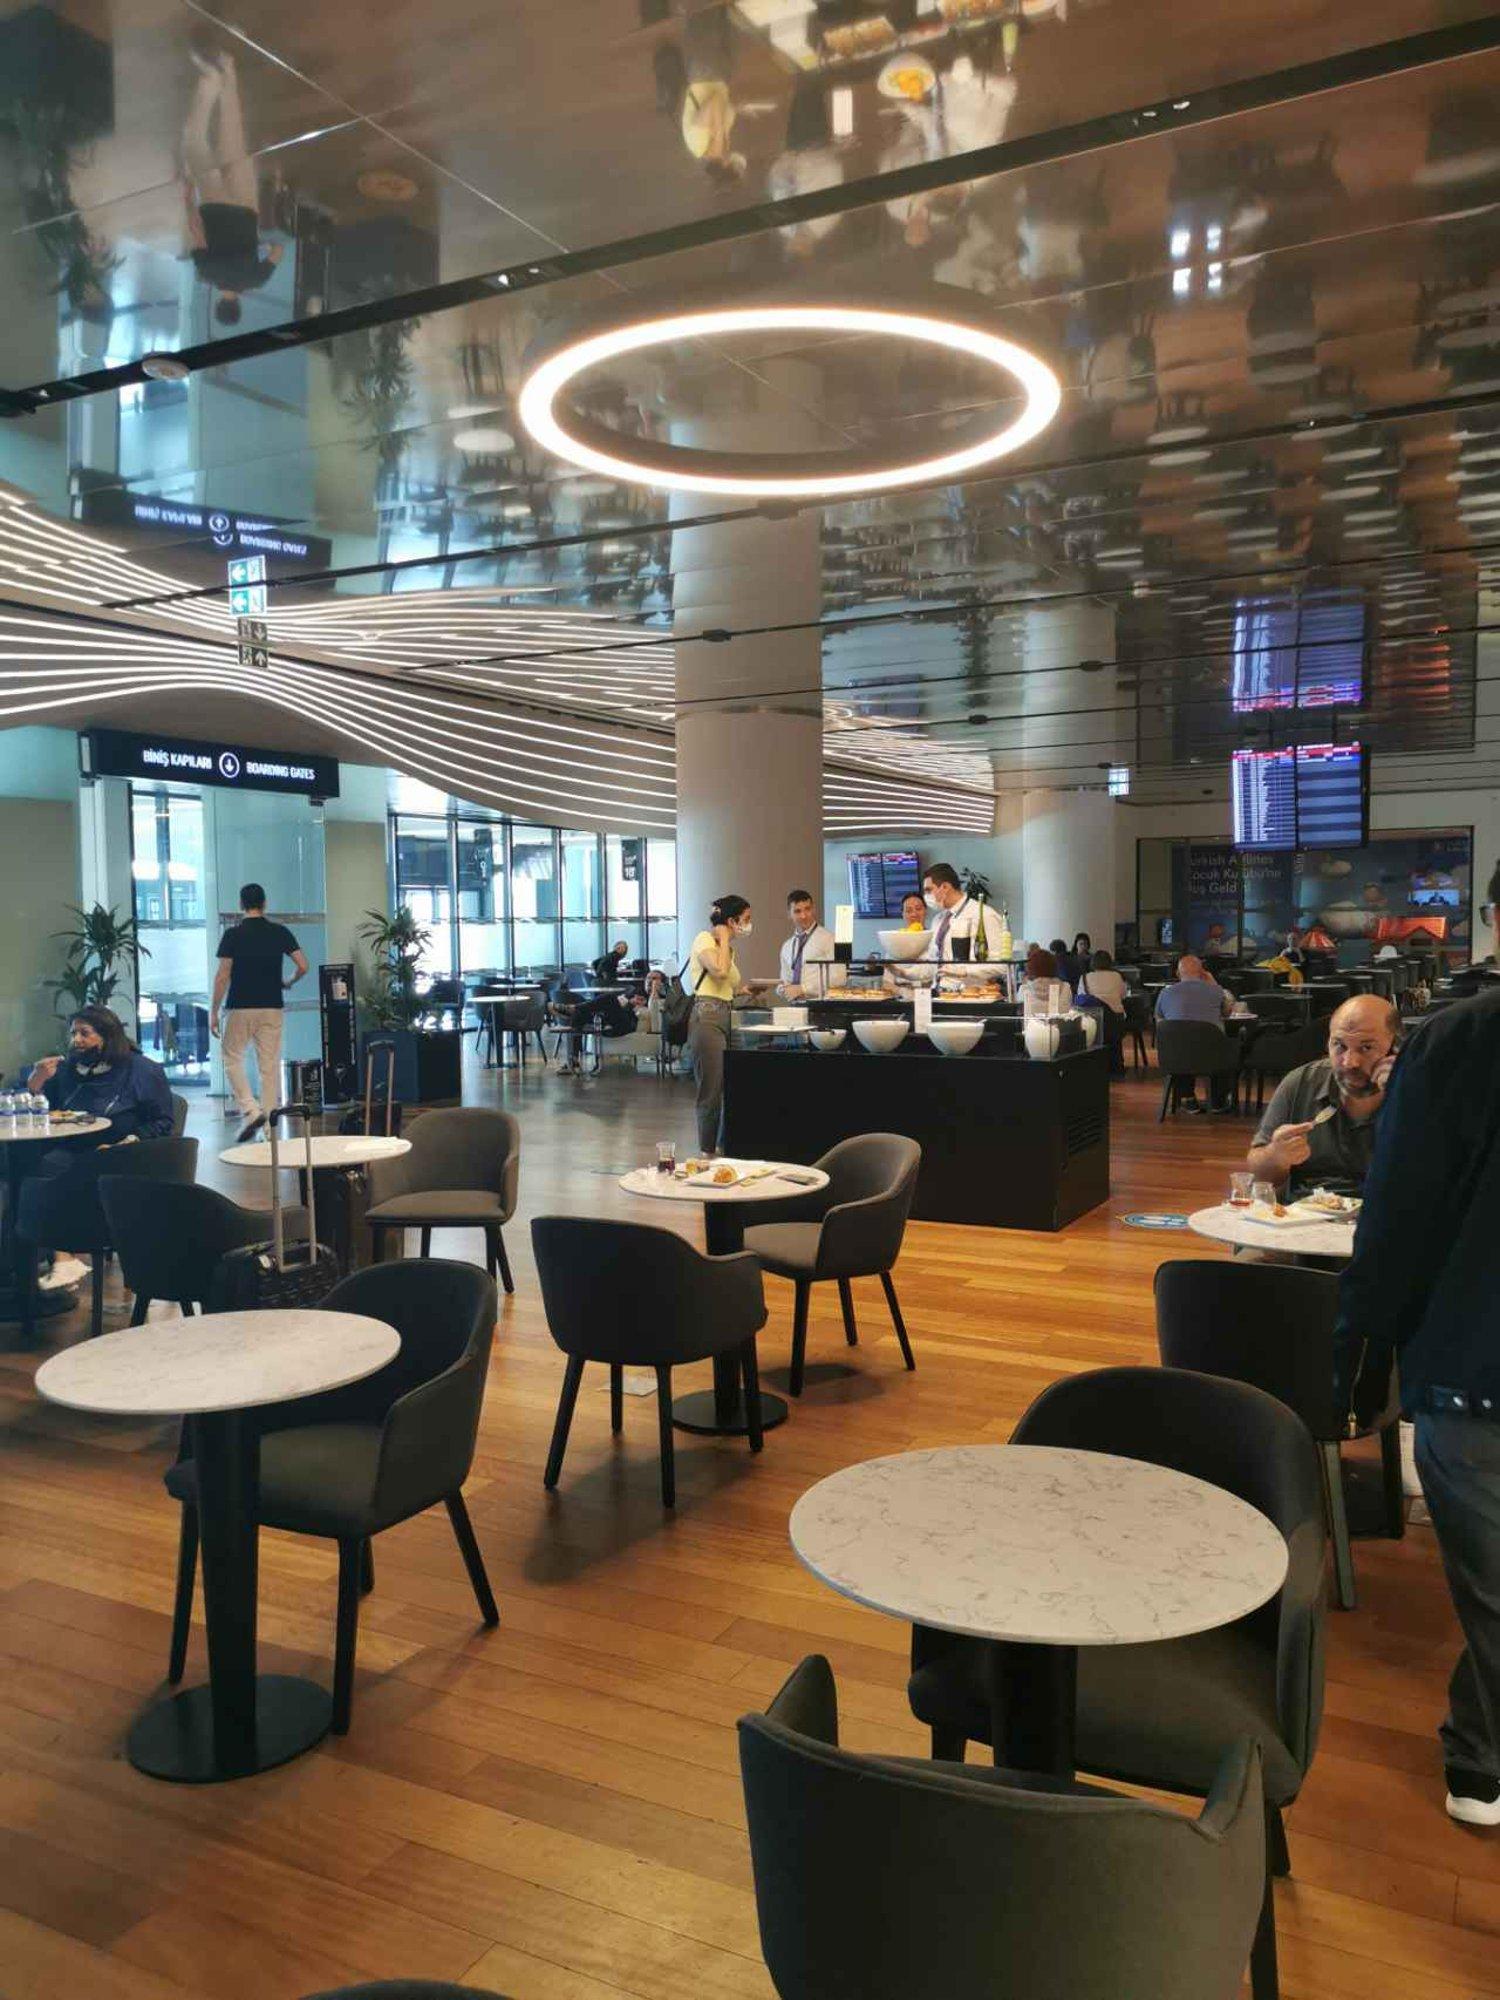 Turkish Airlines Lounge Domestic image 3 of 4